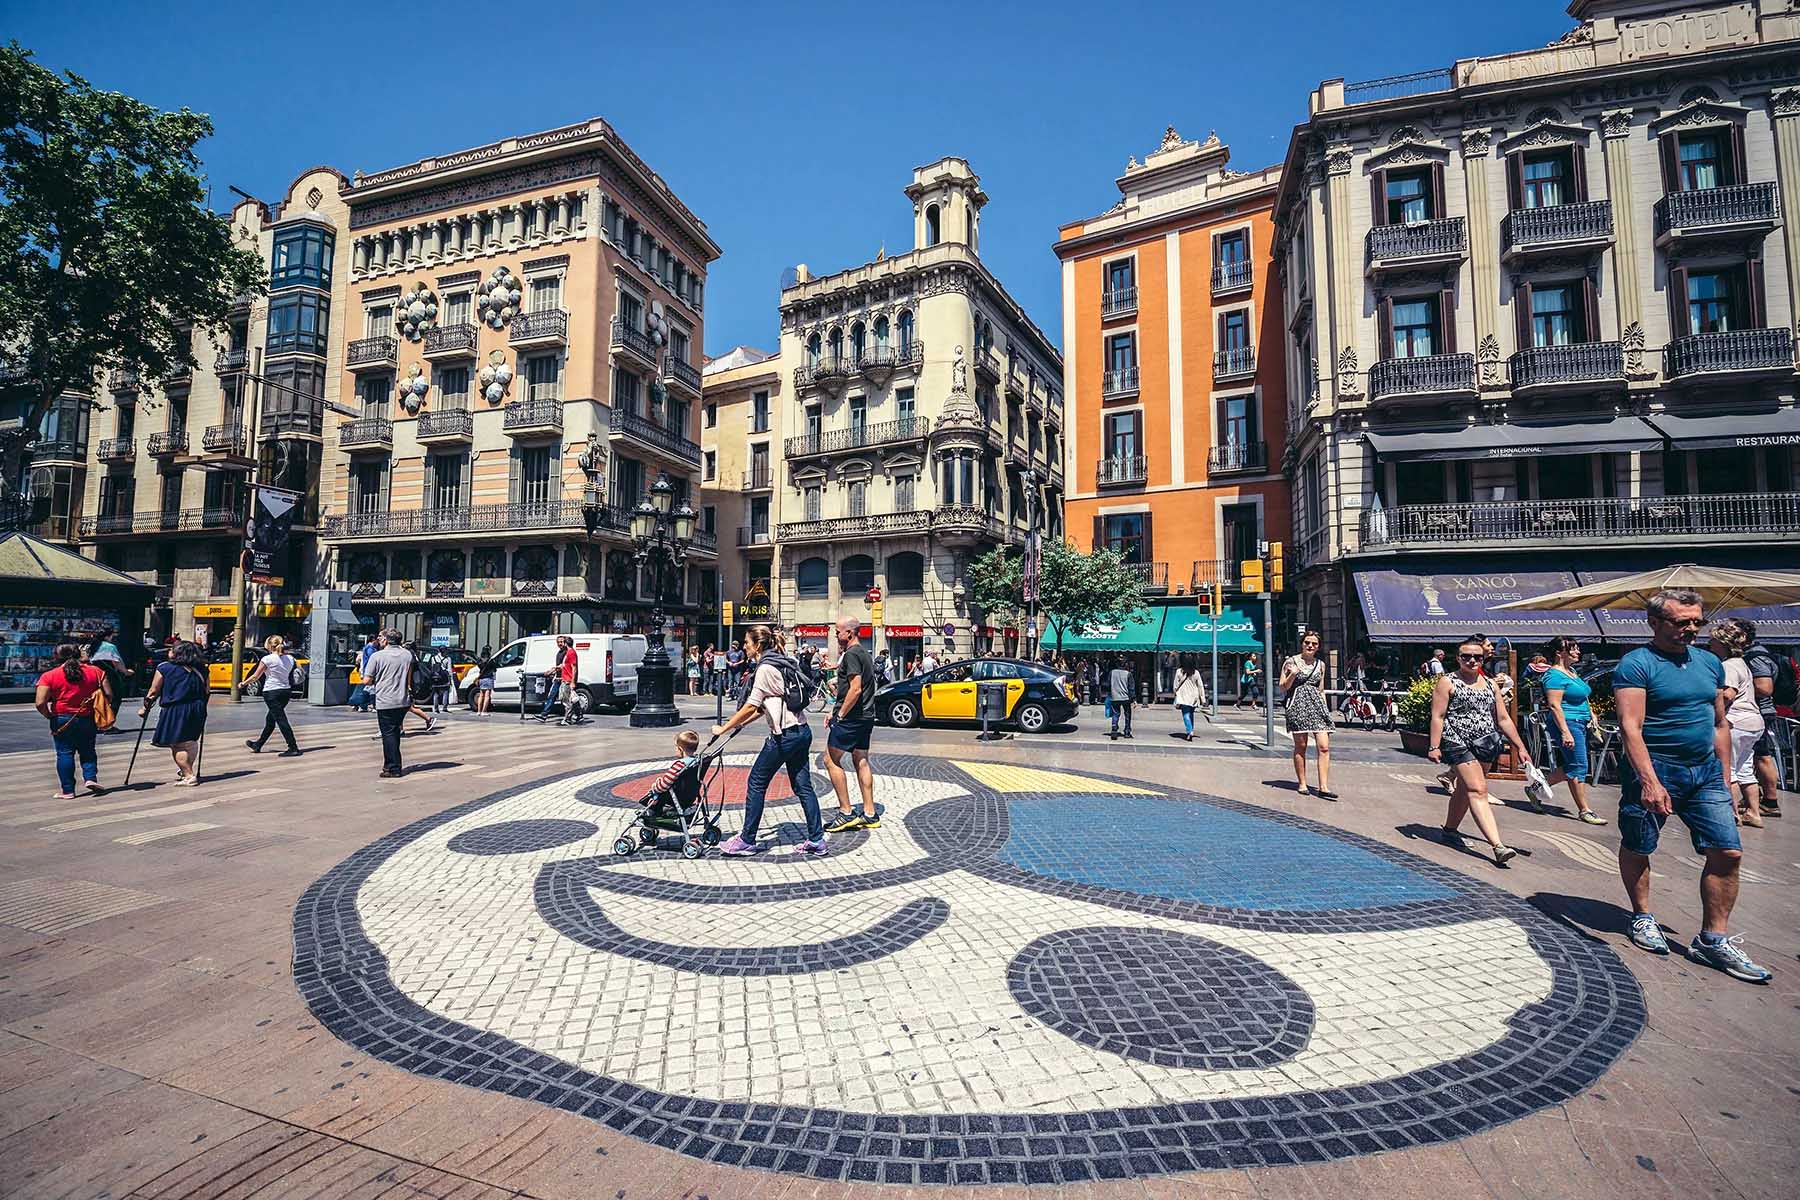 People walking on a square in Barcelona city center.